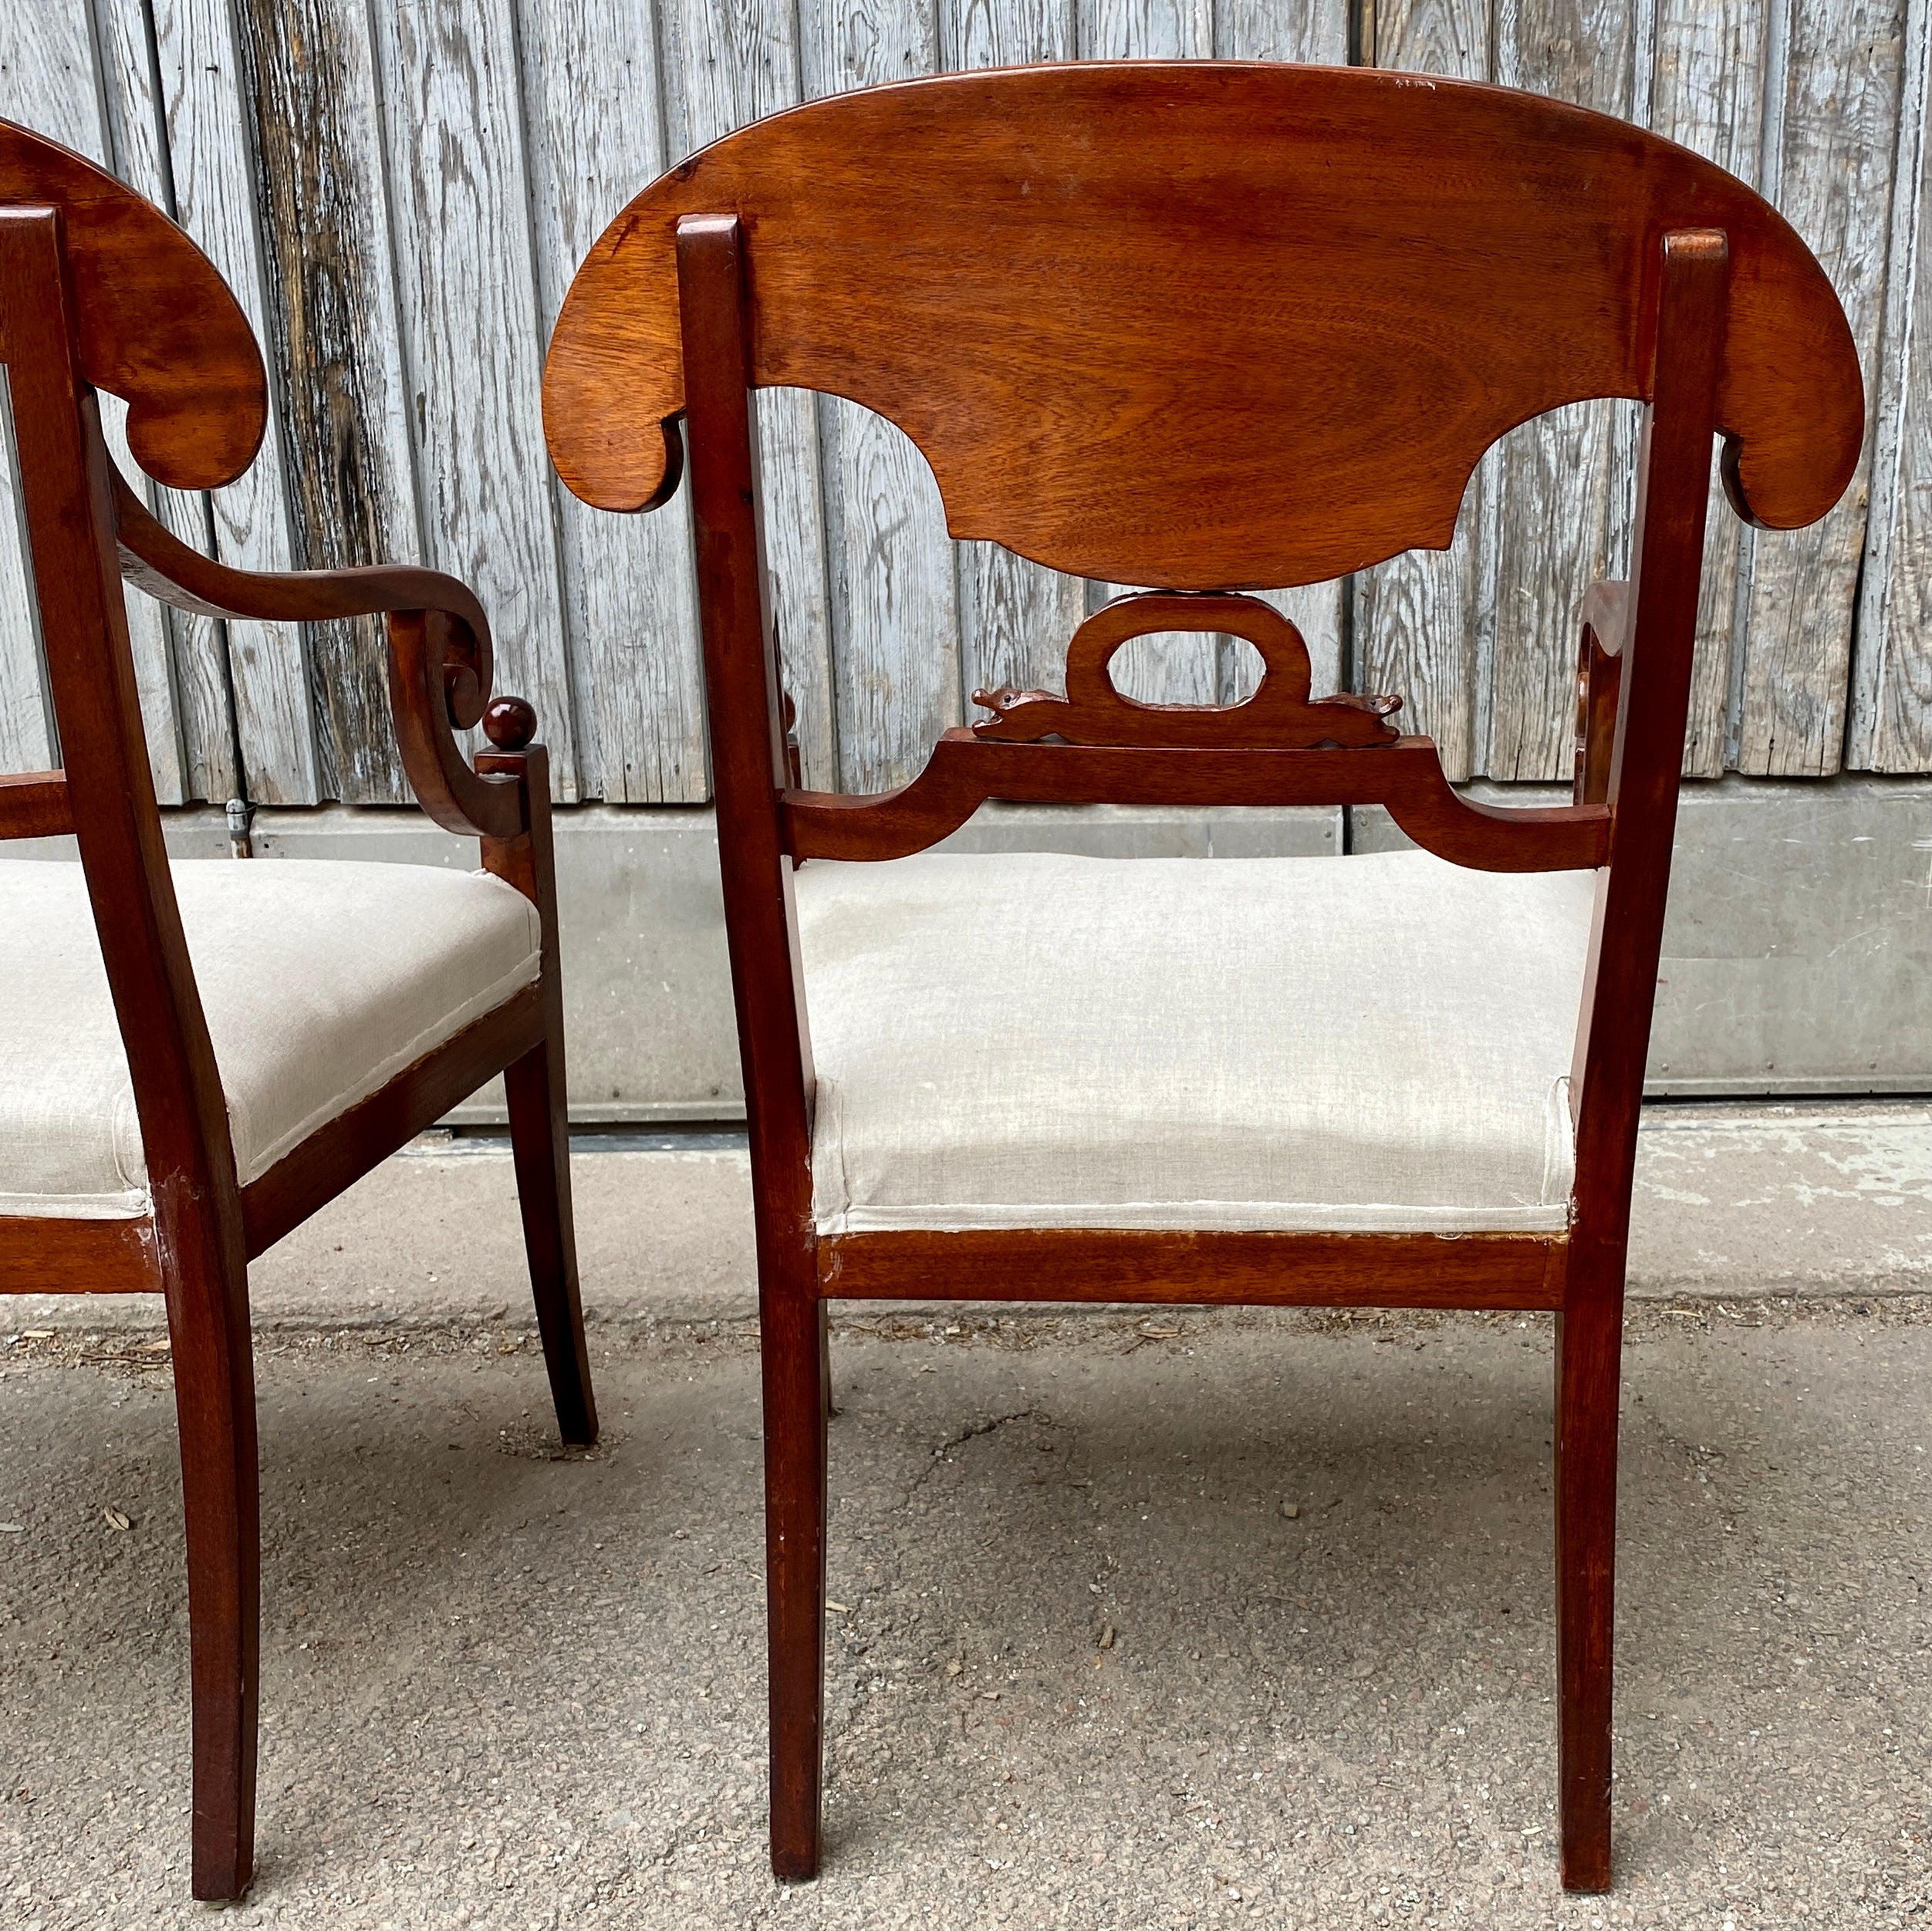 Pair of Swedish Empire Mahogany Armchairs 19th Century Sweden In Good Condition For Sale In Haddonfield, NJ